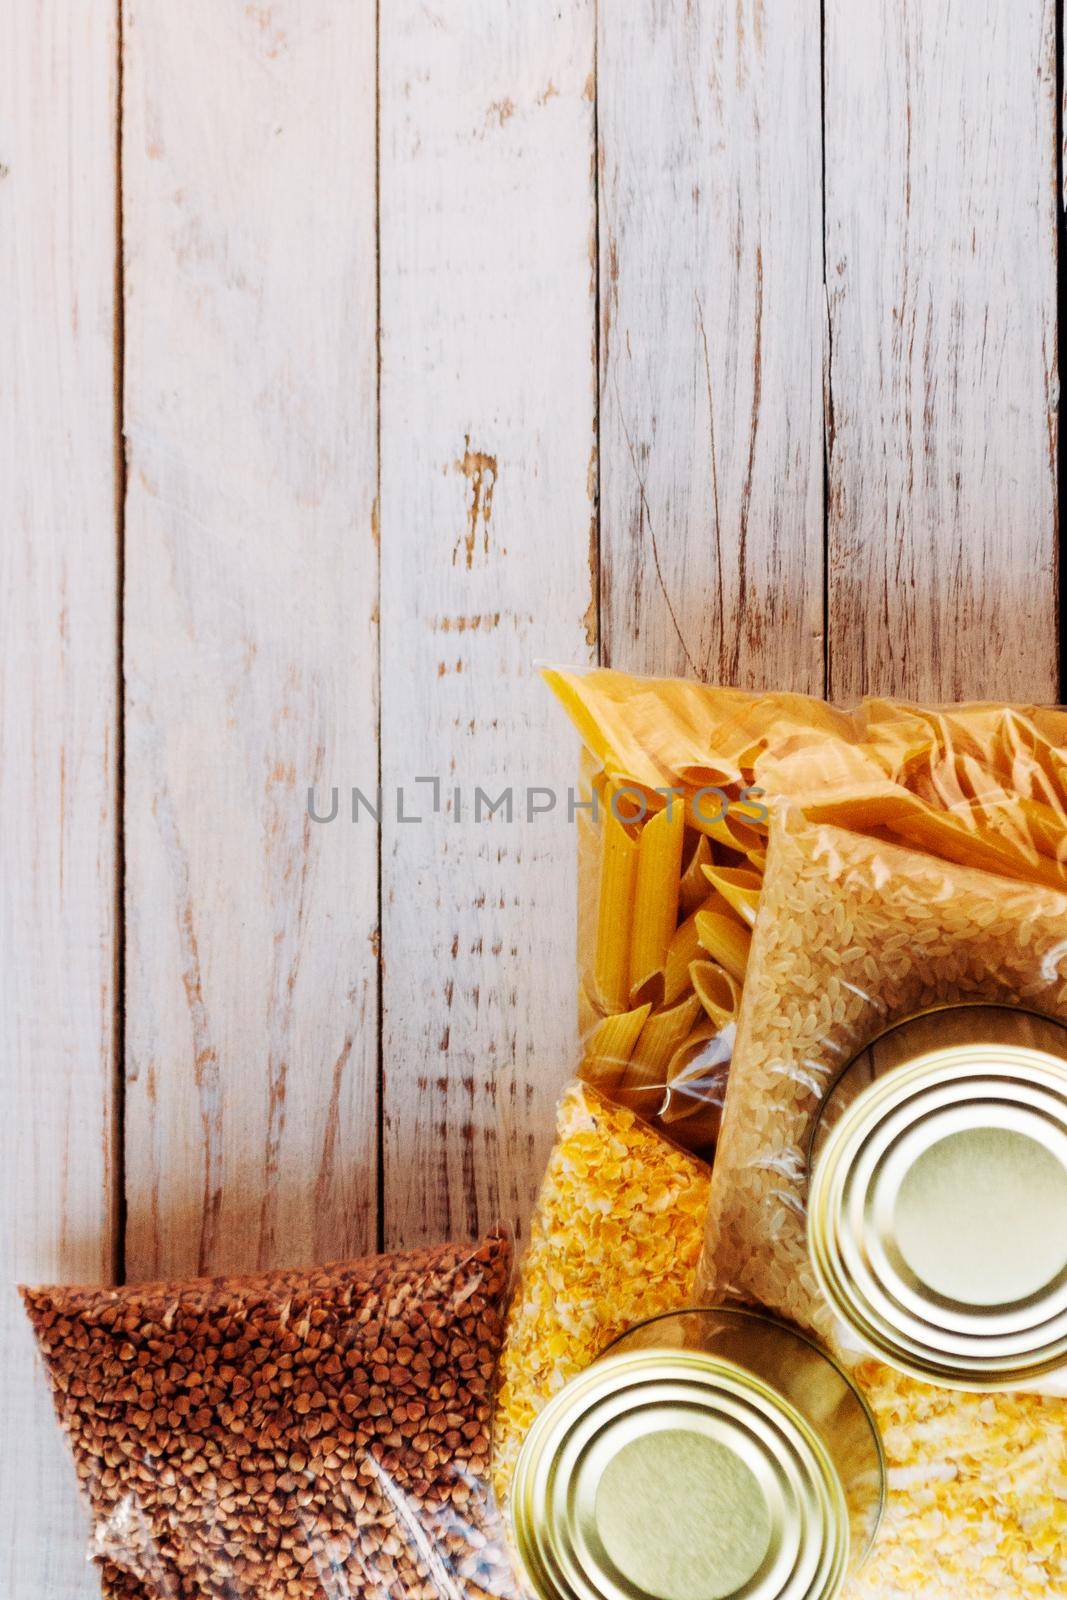 Food supplies quarantine food crisis isolated on white wooden background. Rice, pasta, corn flakes, buckwheat, canned food. Concept of food delivery, donation, charity. Copyspace.